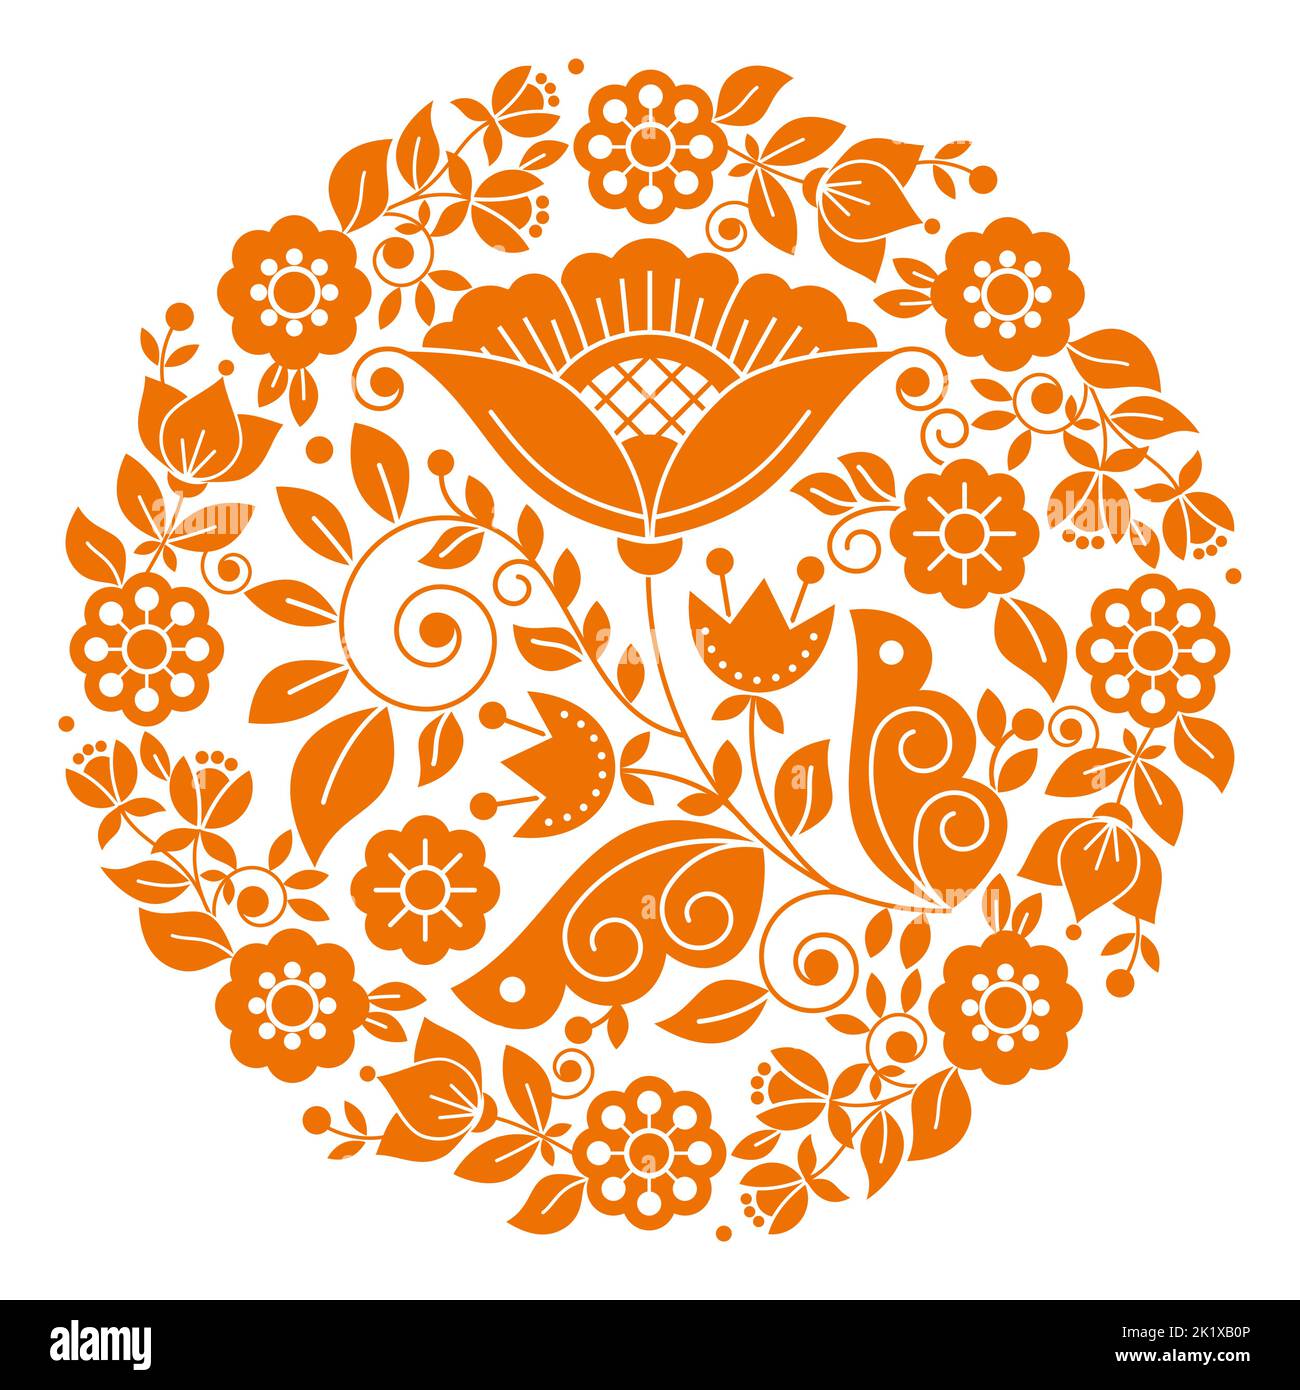 Scandinavian folk art vector floral mandala orange design pattern in frame inspired by the traditional embroidery from Sweden, Norway and Denmark Stock Vector